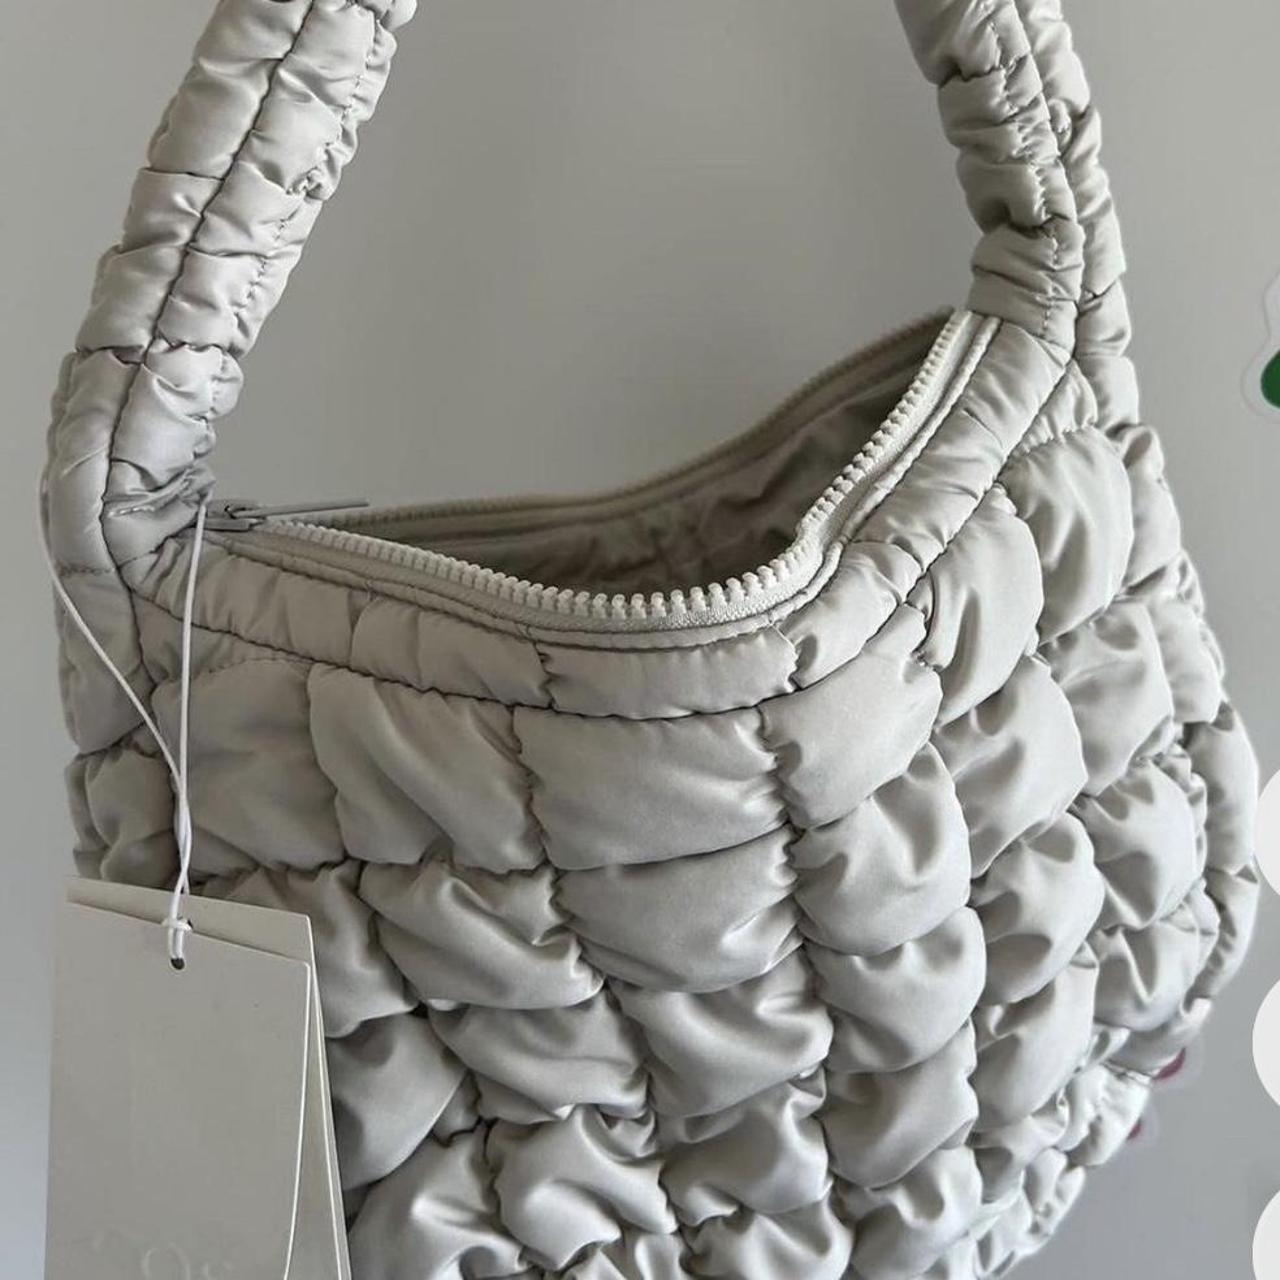 COS Women's Grey and White Bag